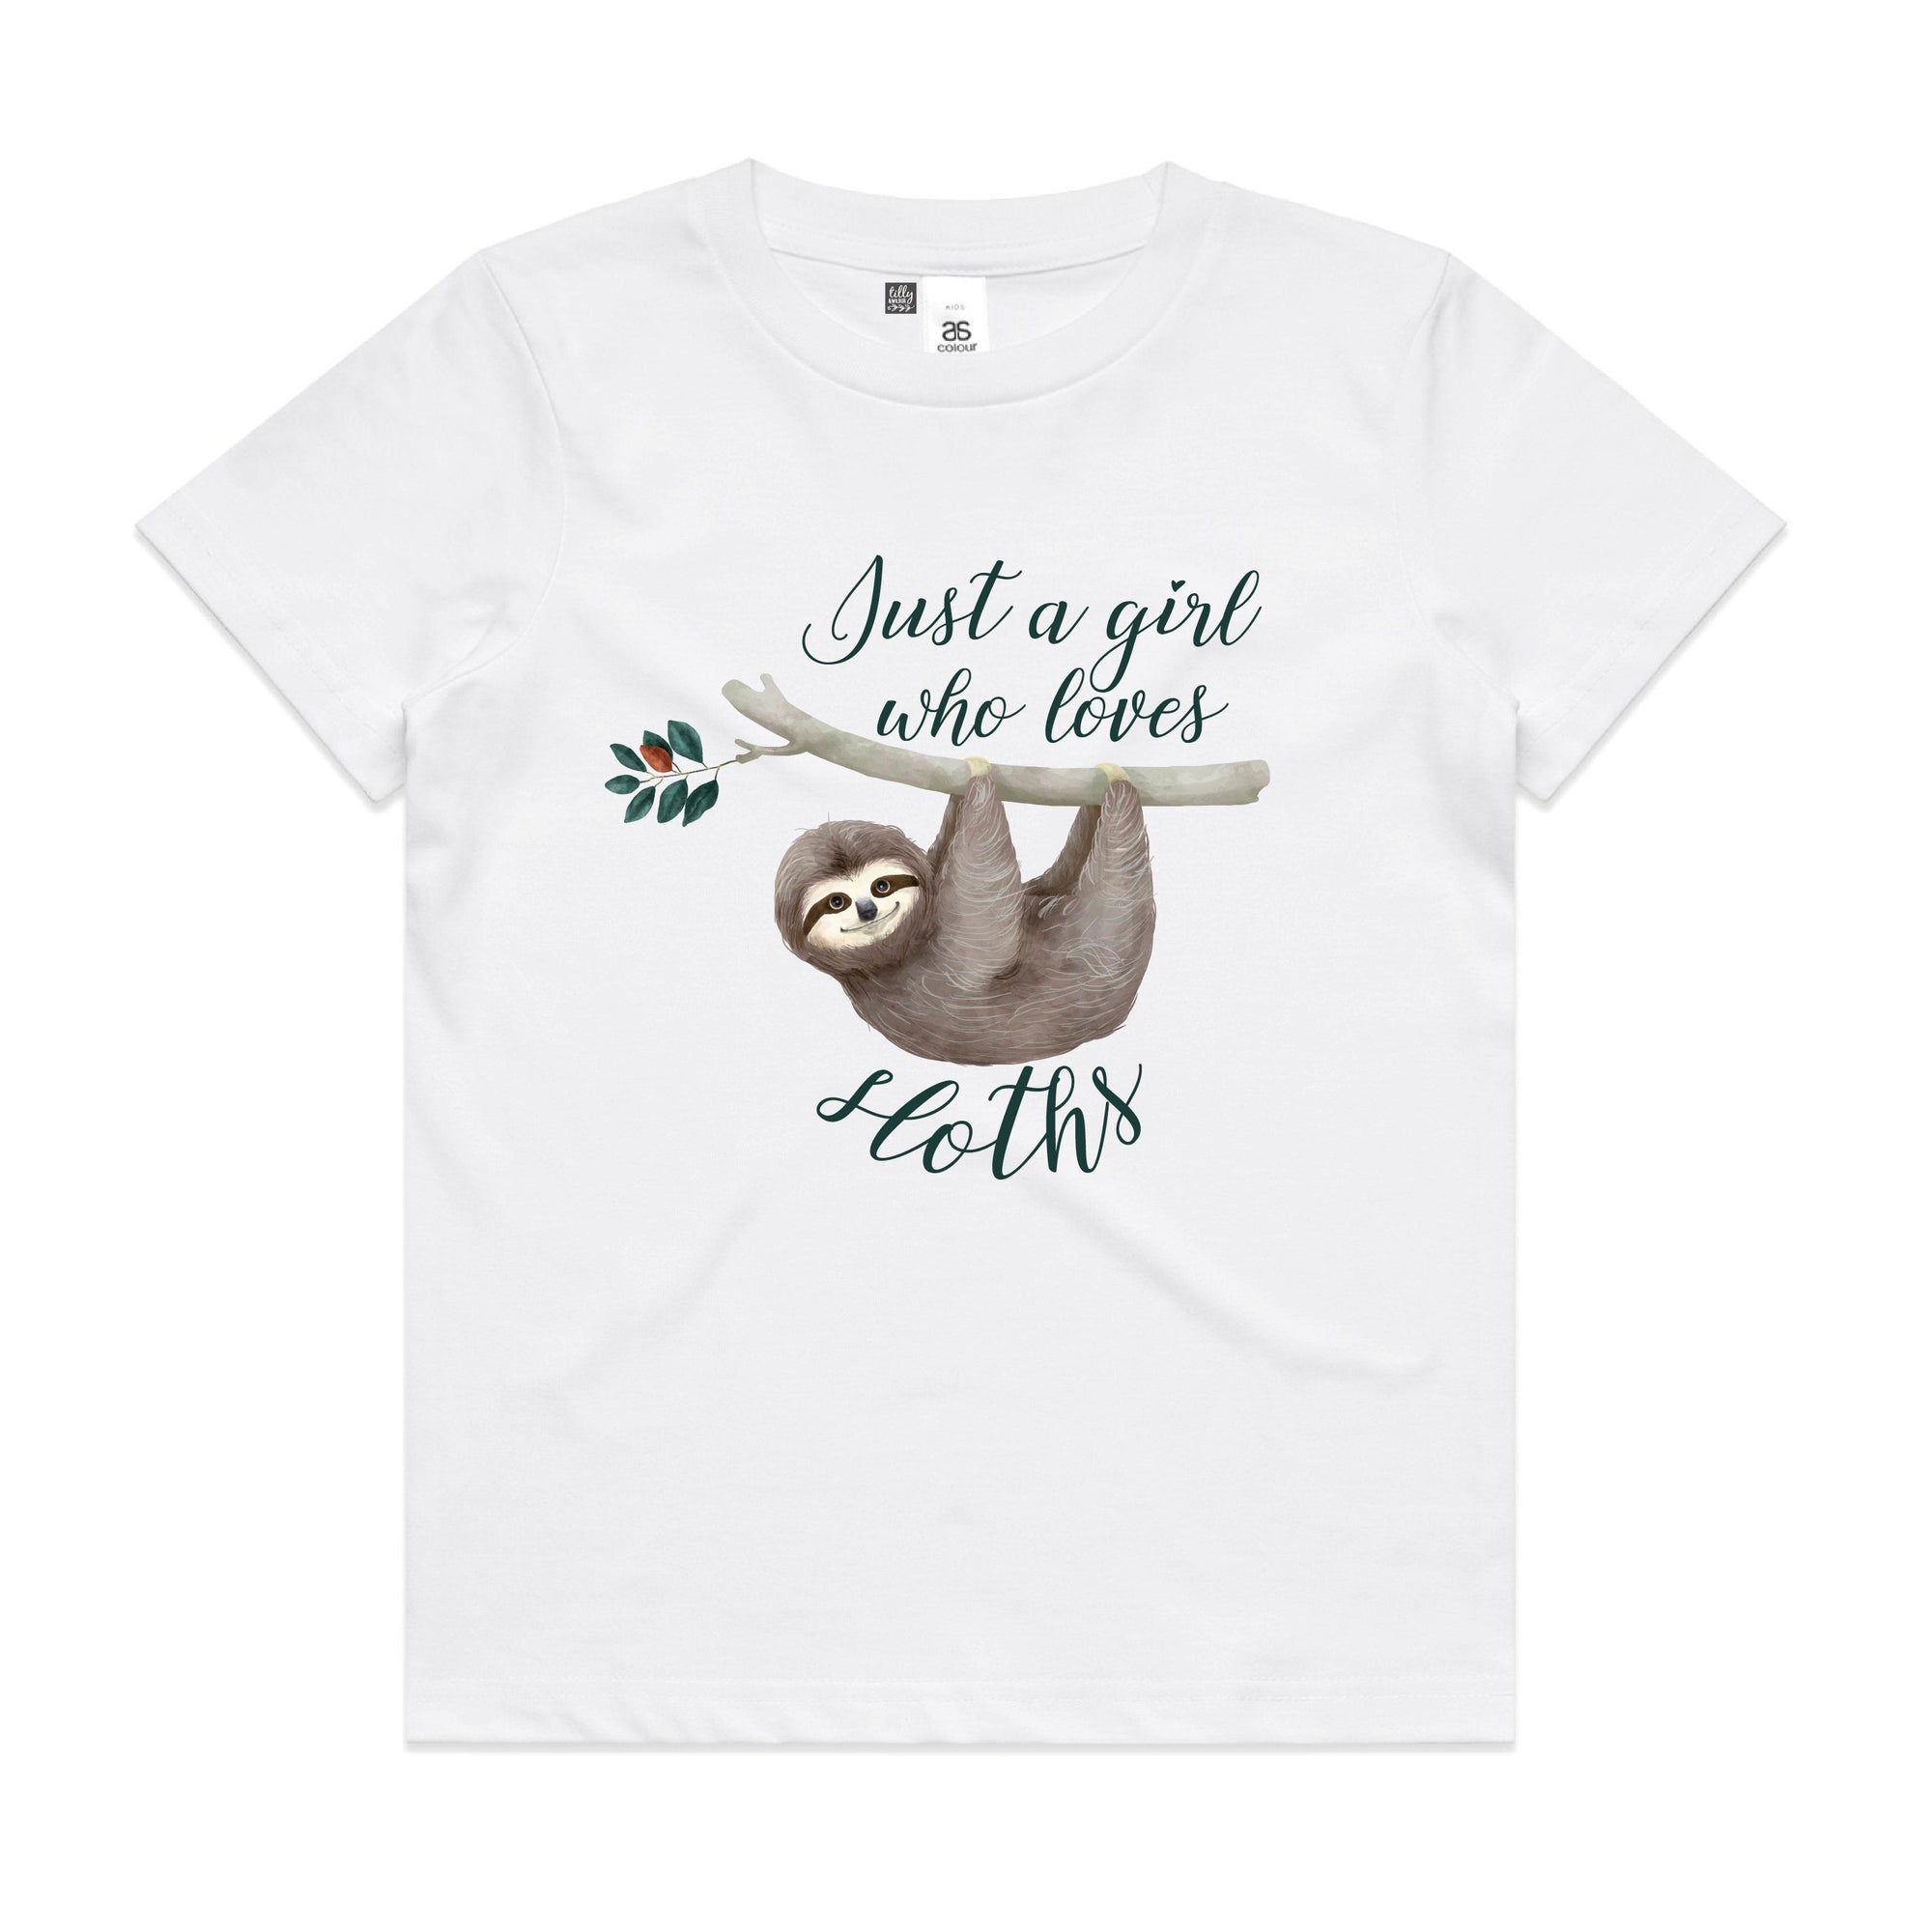 Just A Girl Who Loves Sloths Girl&#39;s T-Shirt, Sloth T-Shirt For Girls, Sloth T-Shirt, Sloth Gift, Sloth Lover, Sloth Tee For Girls, Sloth Tee